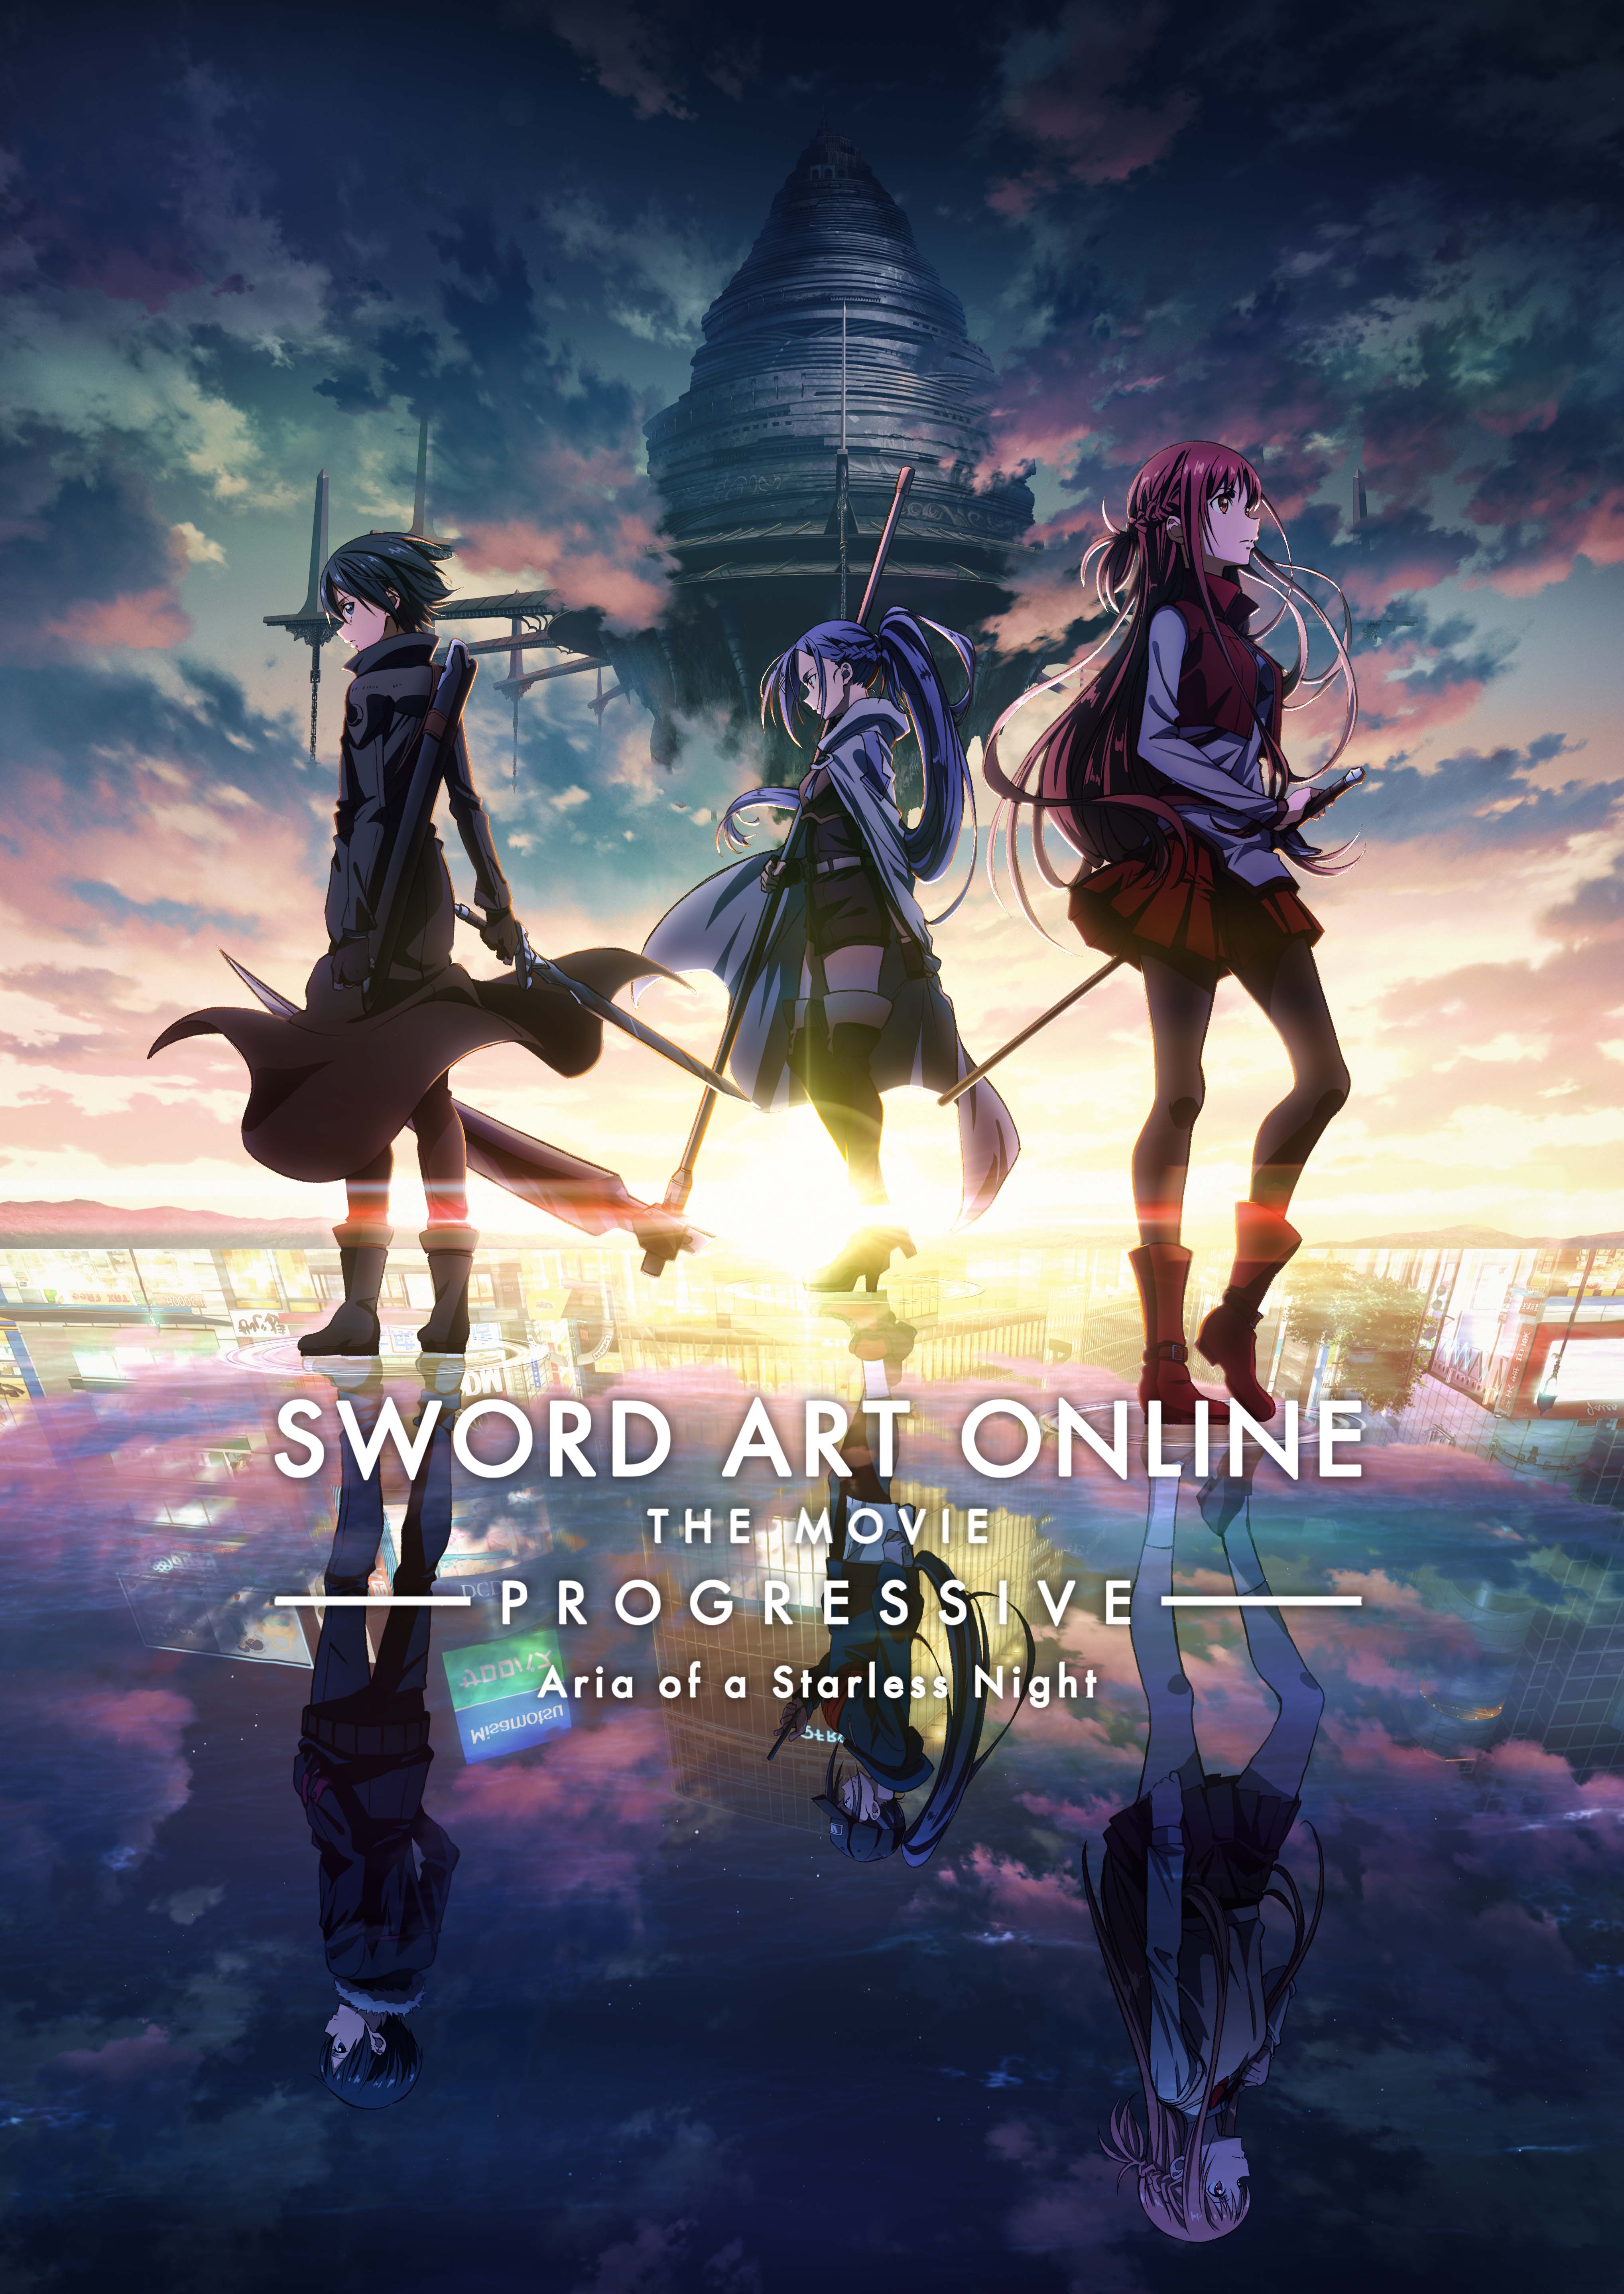 Watch Sword Art Online - Progressive, Laid-Back Camp The Movie and more anime movies on Crunchyroll